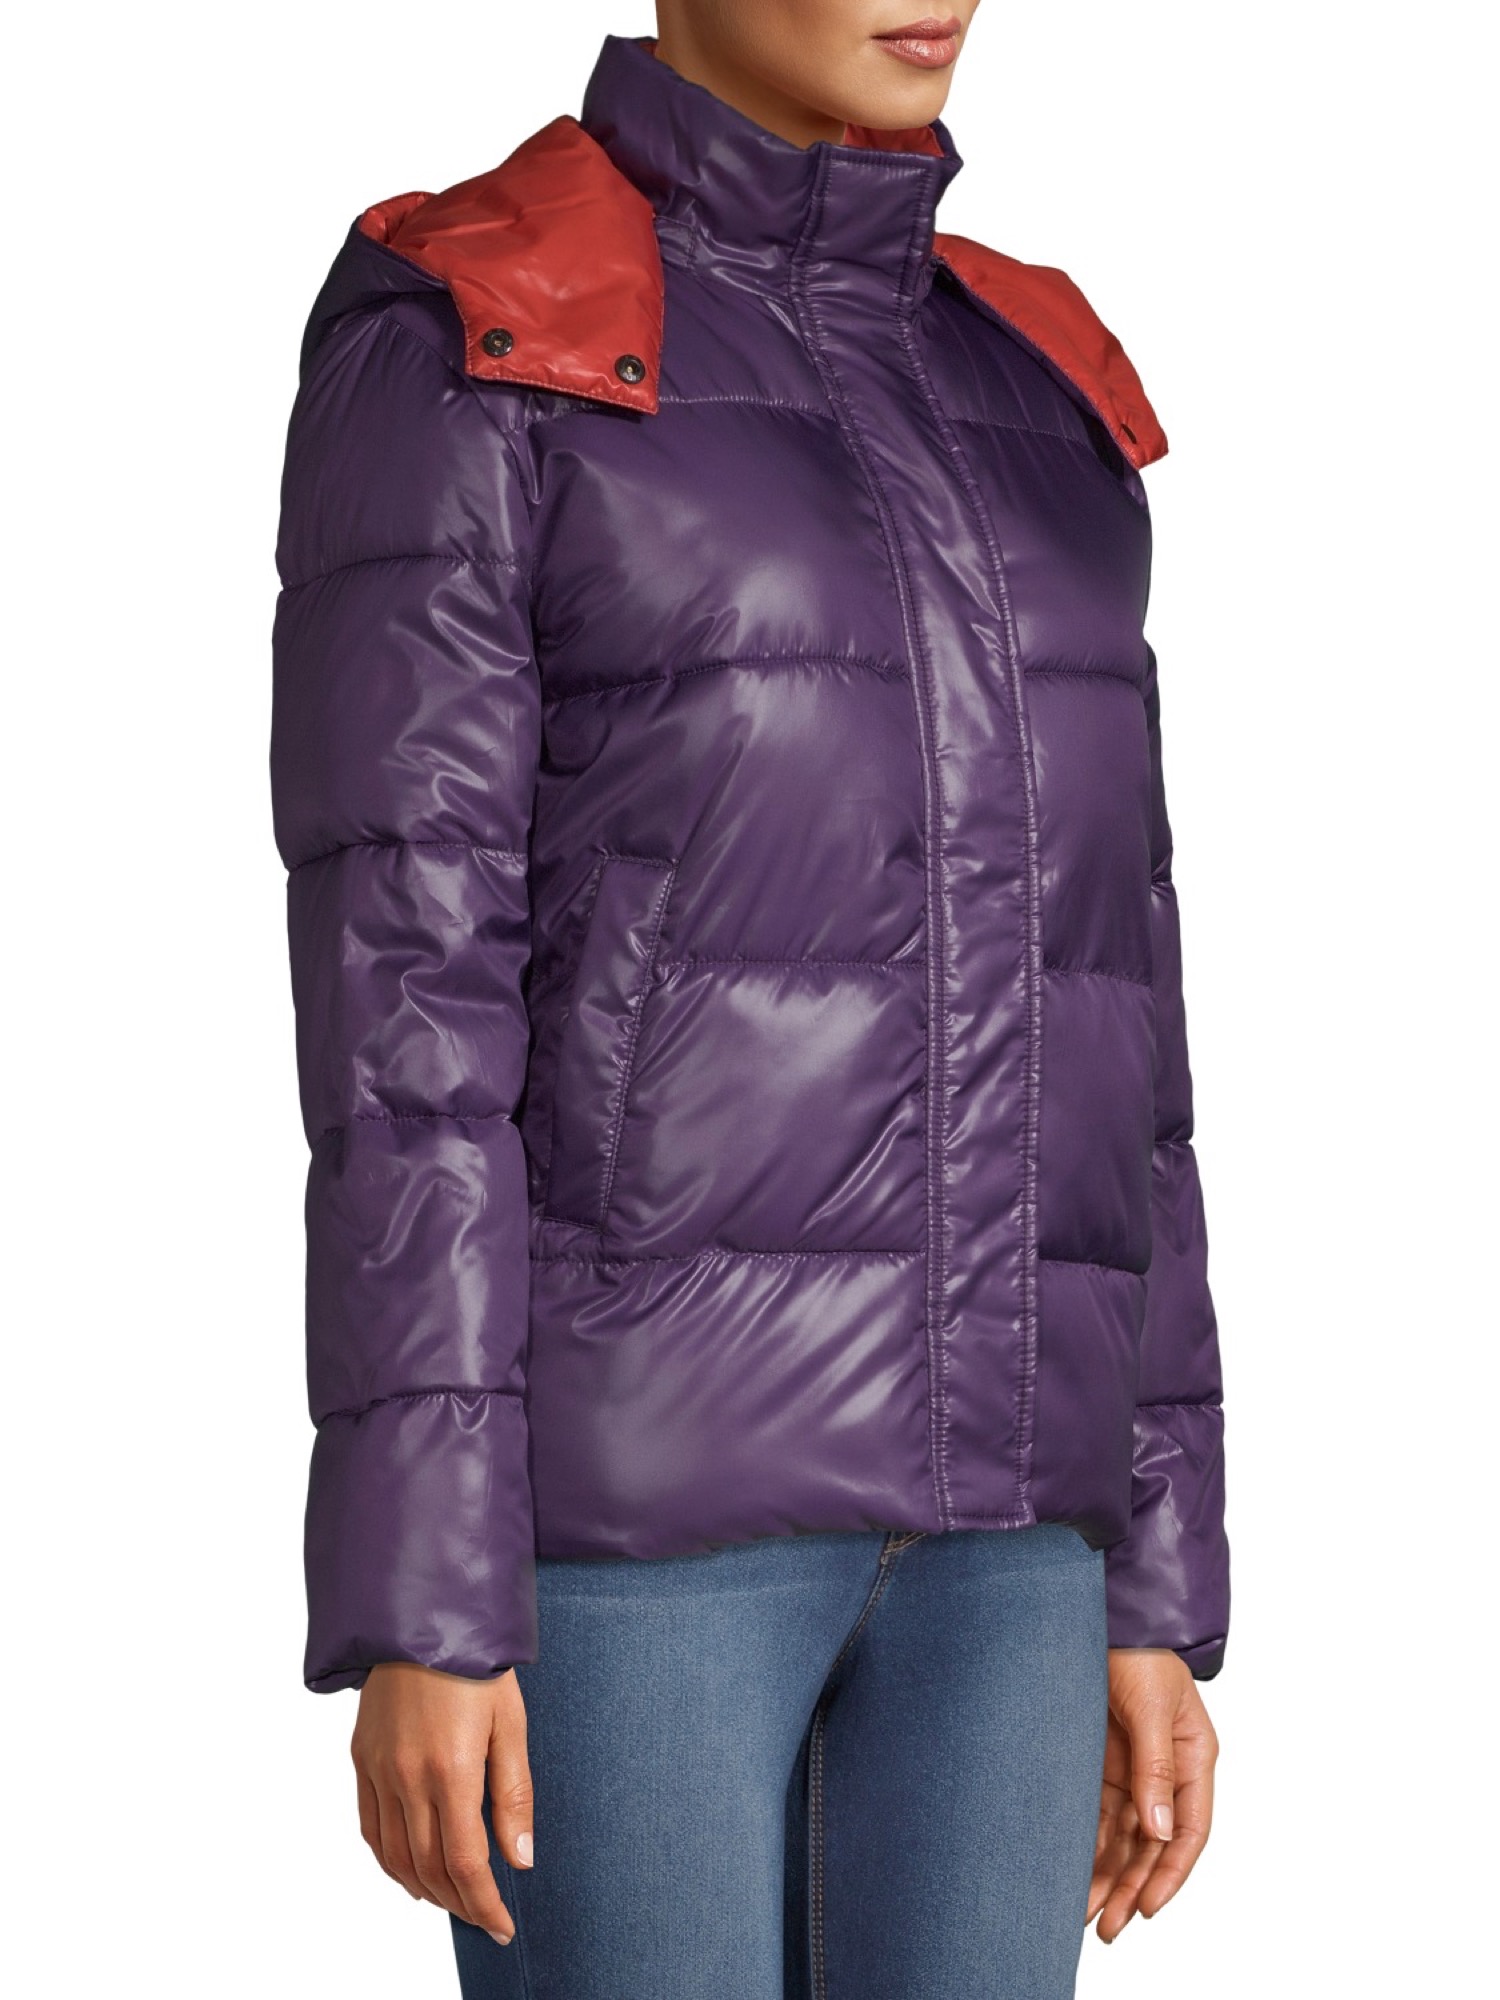 Kendall + Kylie Women's Two Tone Puffer - image 4 of 6